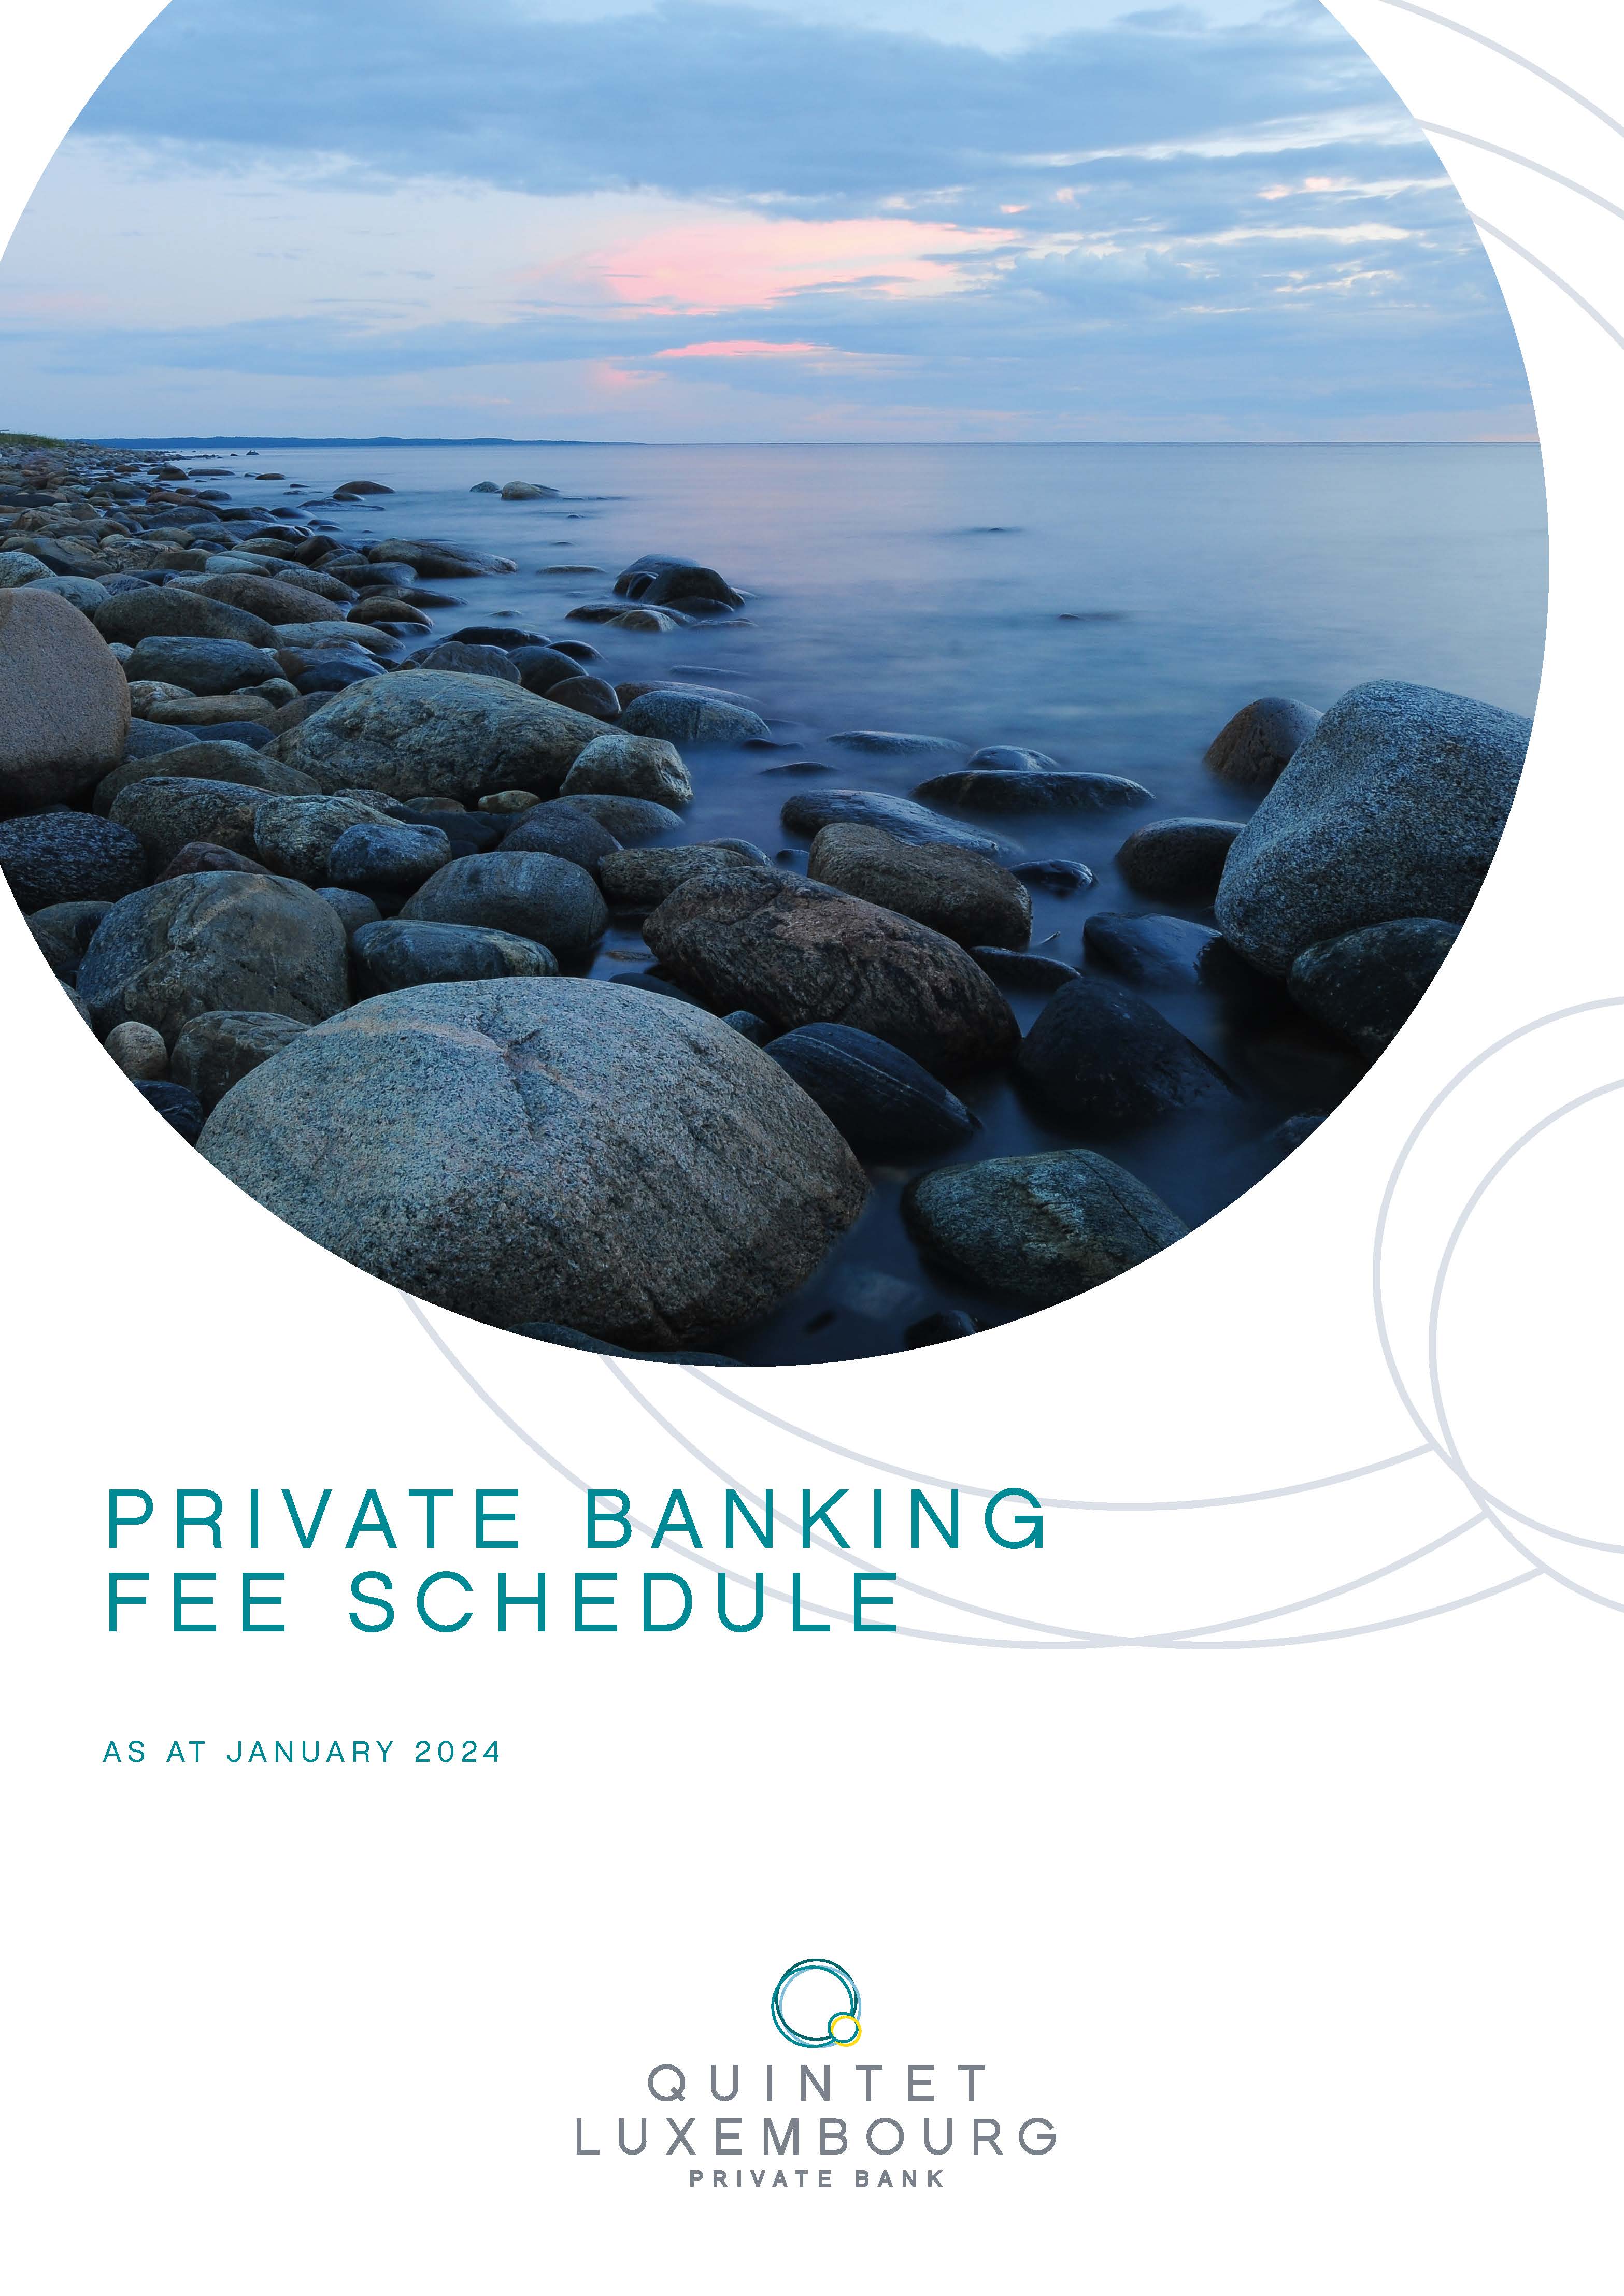 Private banking fee schedule